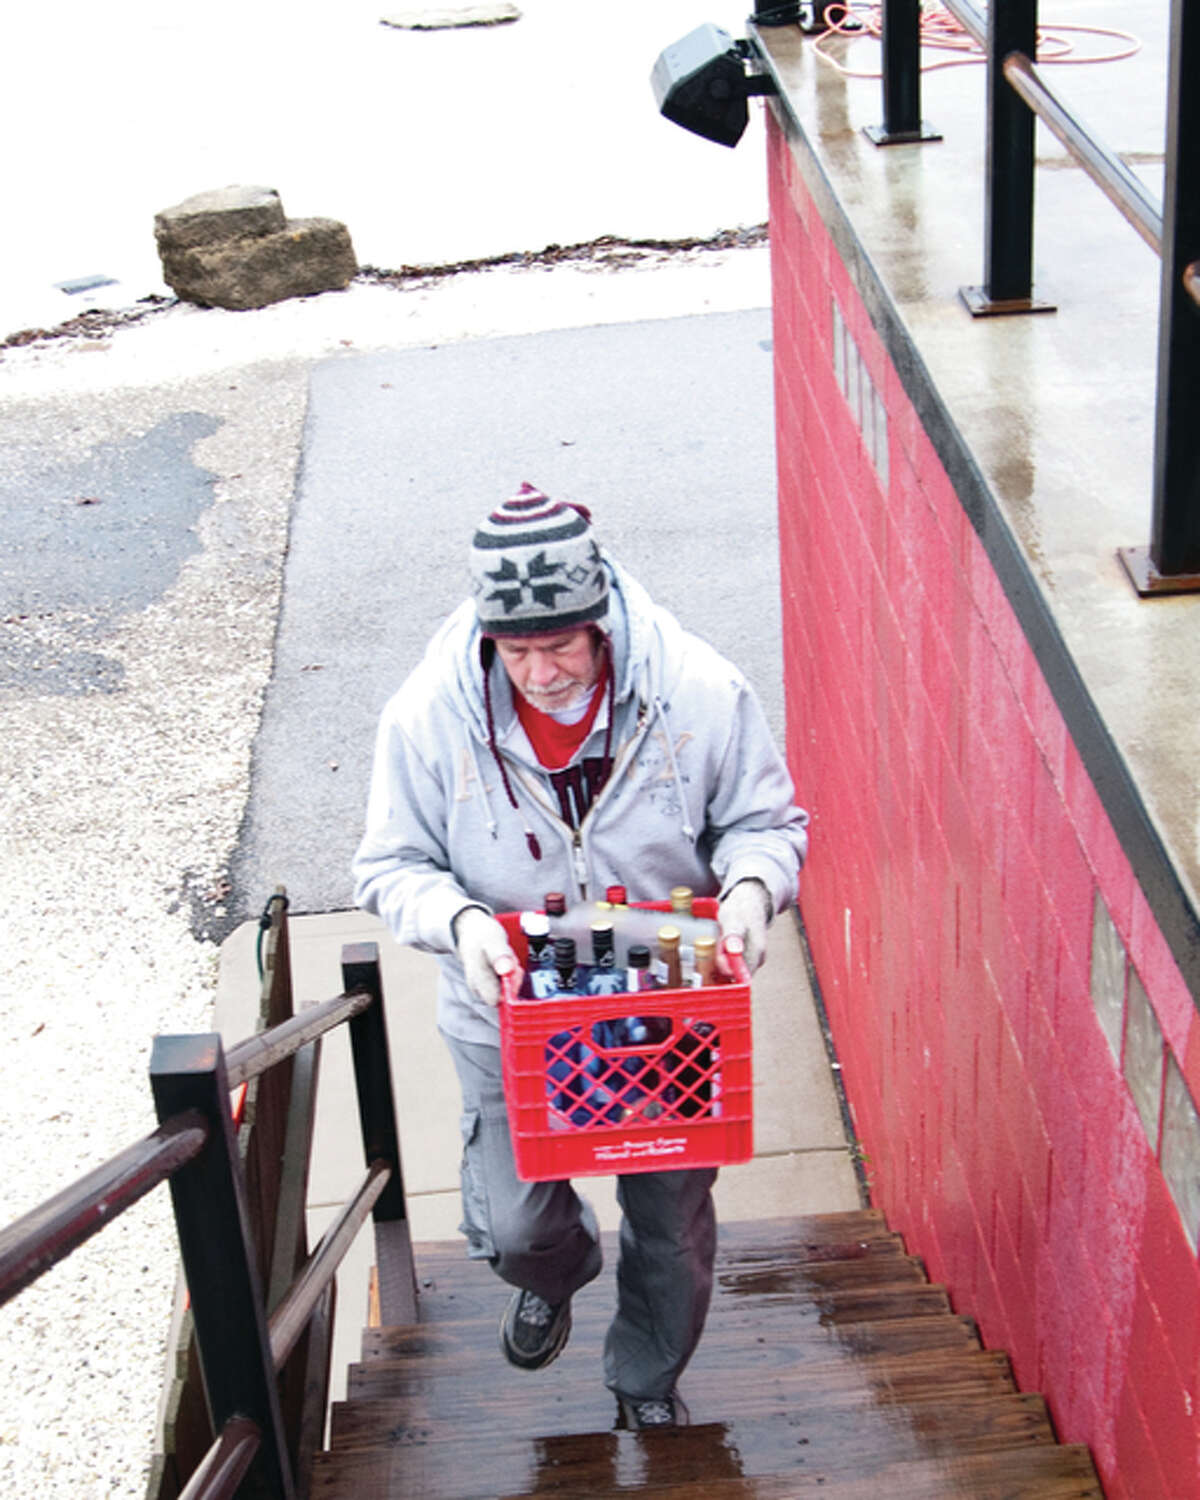 Greg Brummett brings crates to the top level of the Hawg Pit where river water is visibly creeping up on to the back of the entrance area.